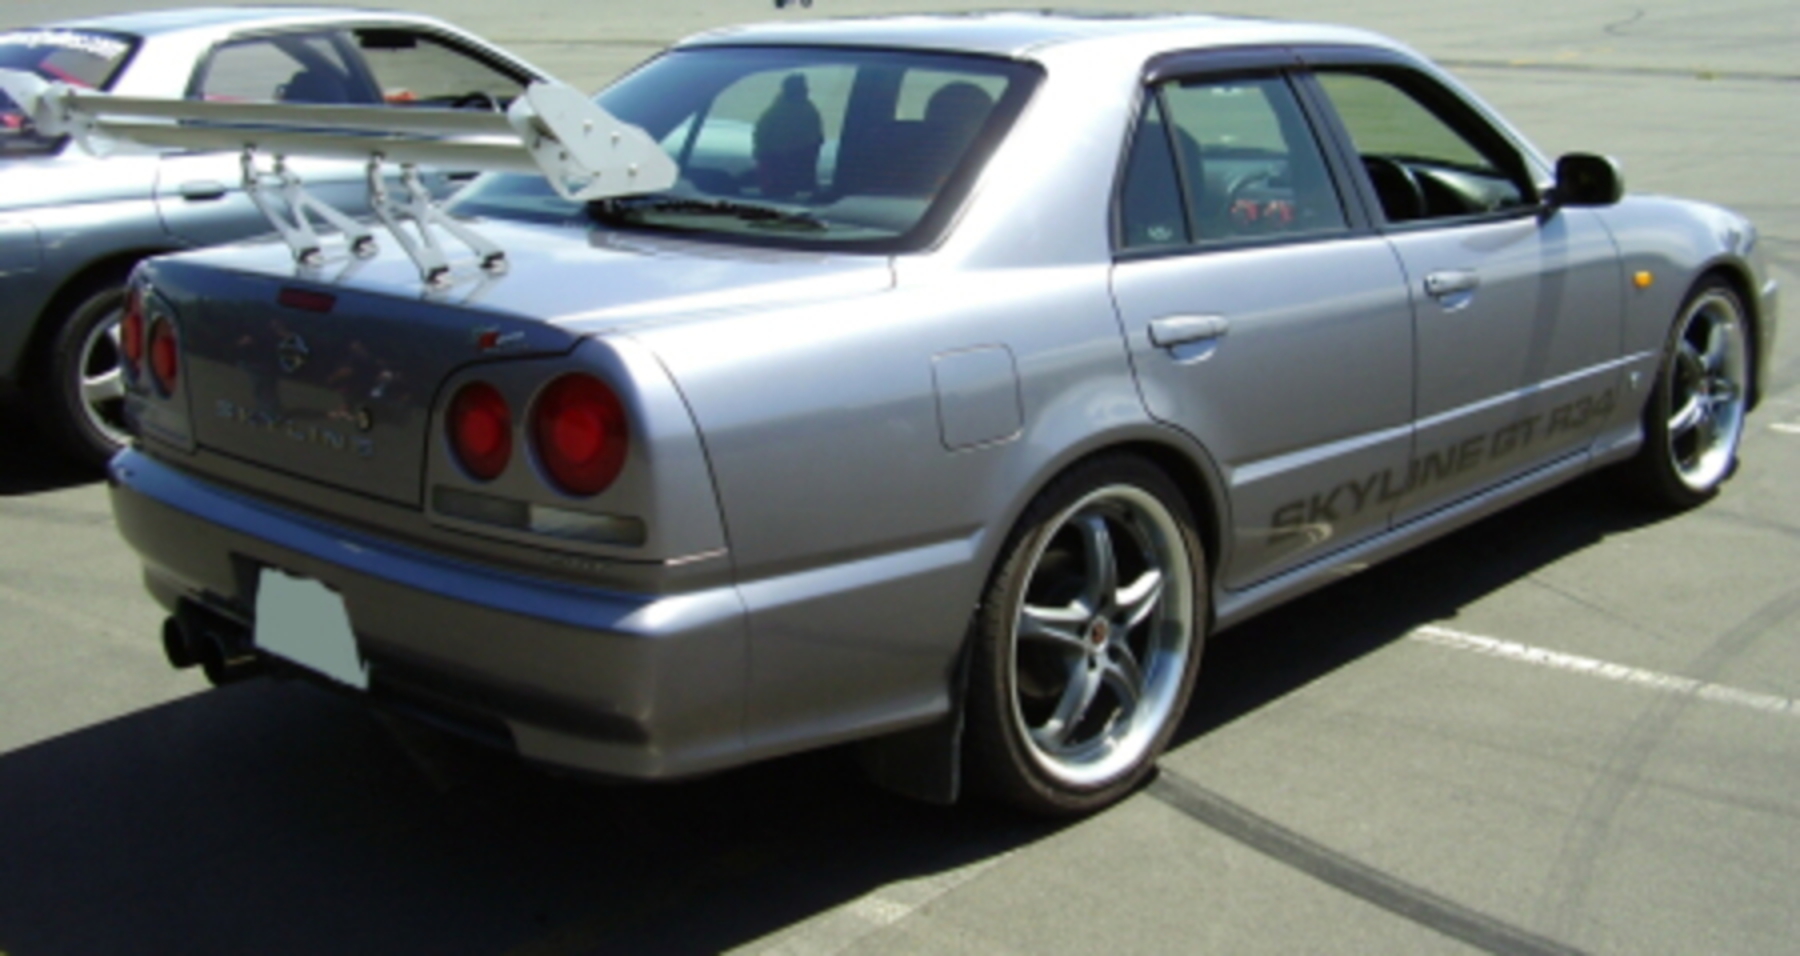 Nissan Skyline 25 GT. View Download Wallpaper. 450x239. Comments